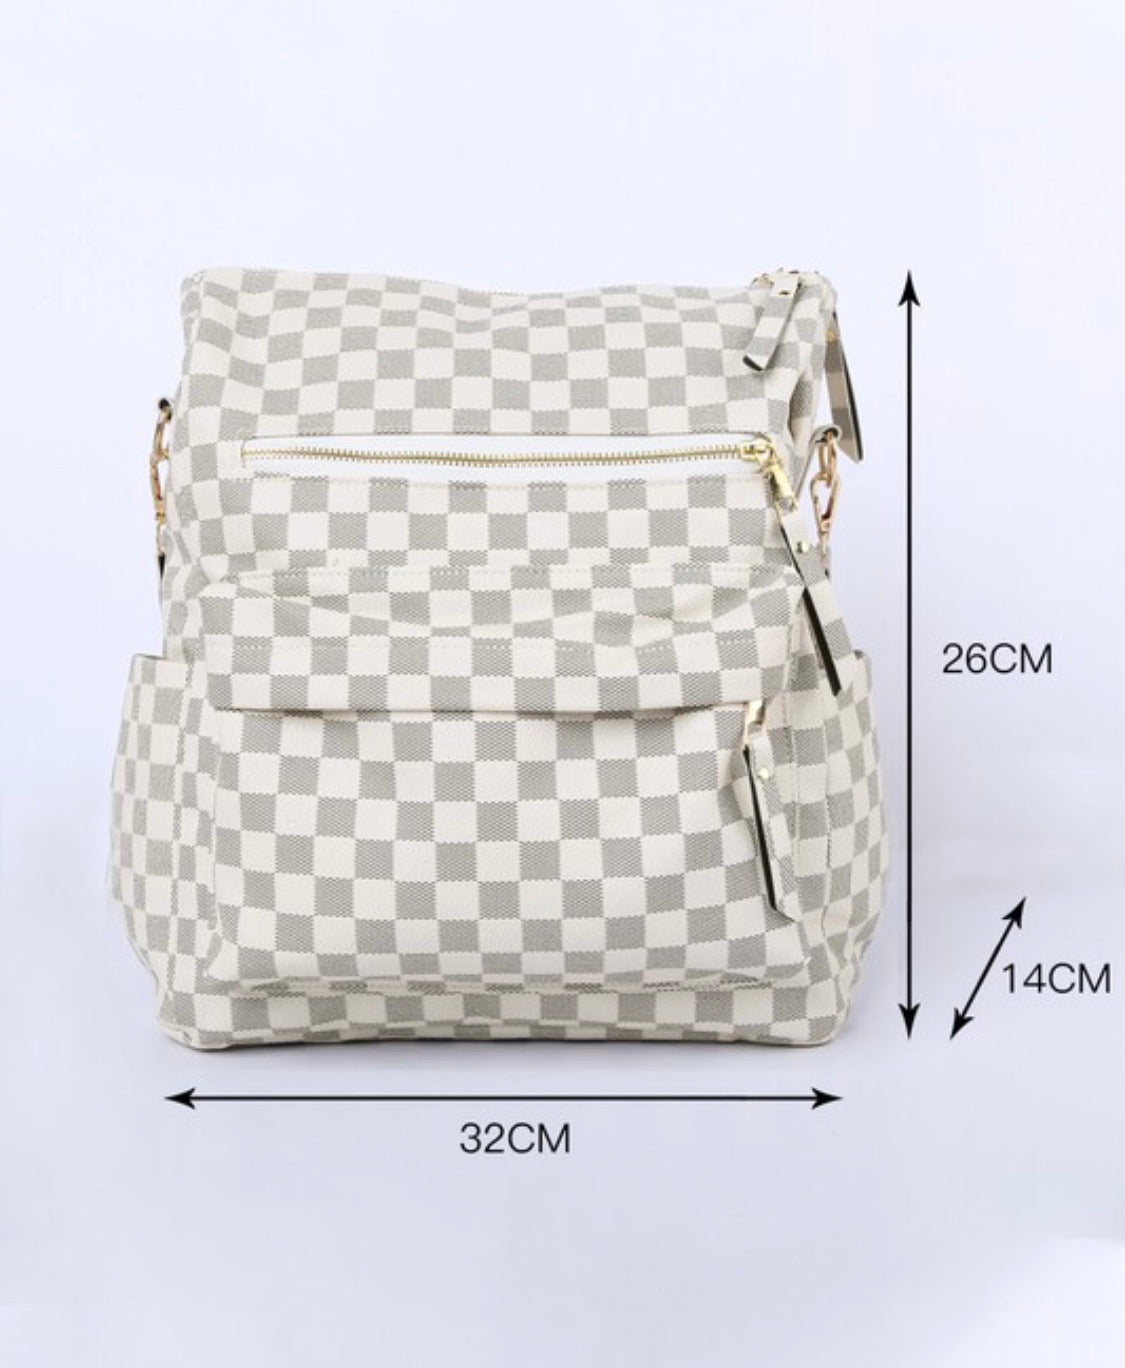 Checkered backpack – Too Chic Boutique